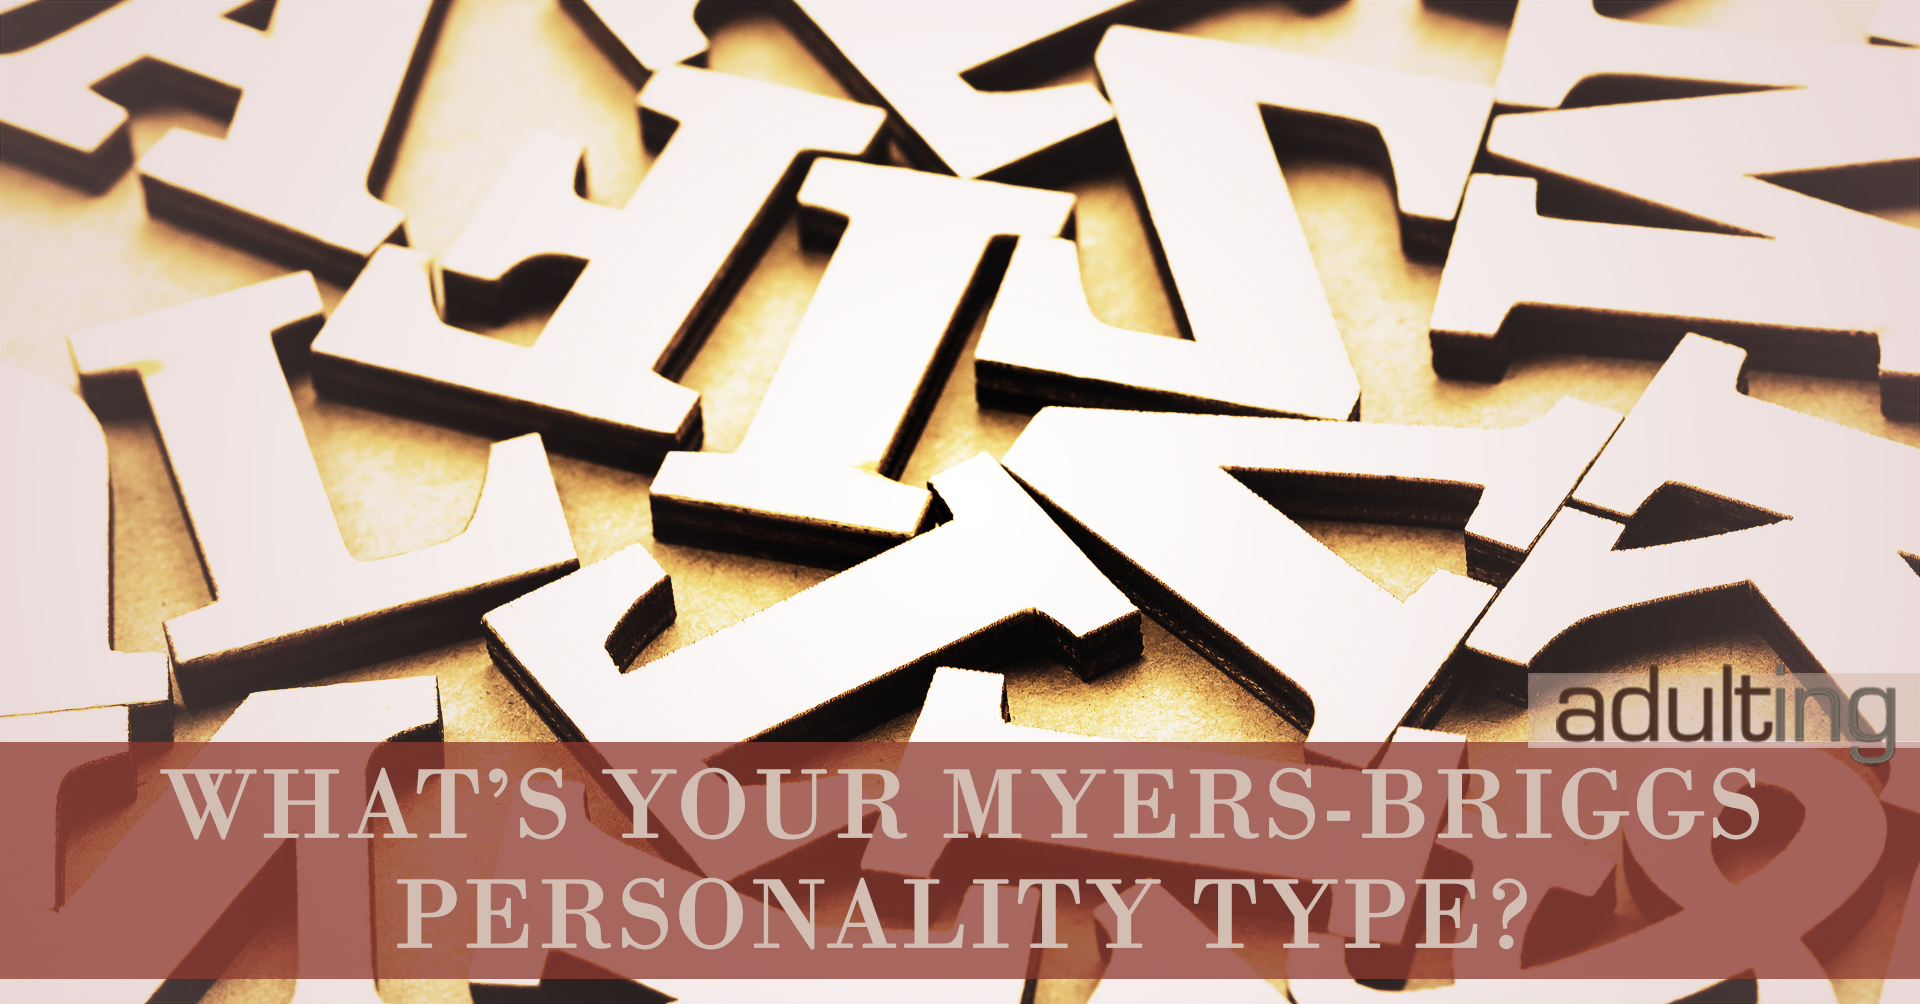 What's Your Myers-Briggs Personality Type?